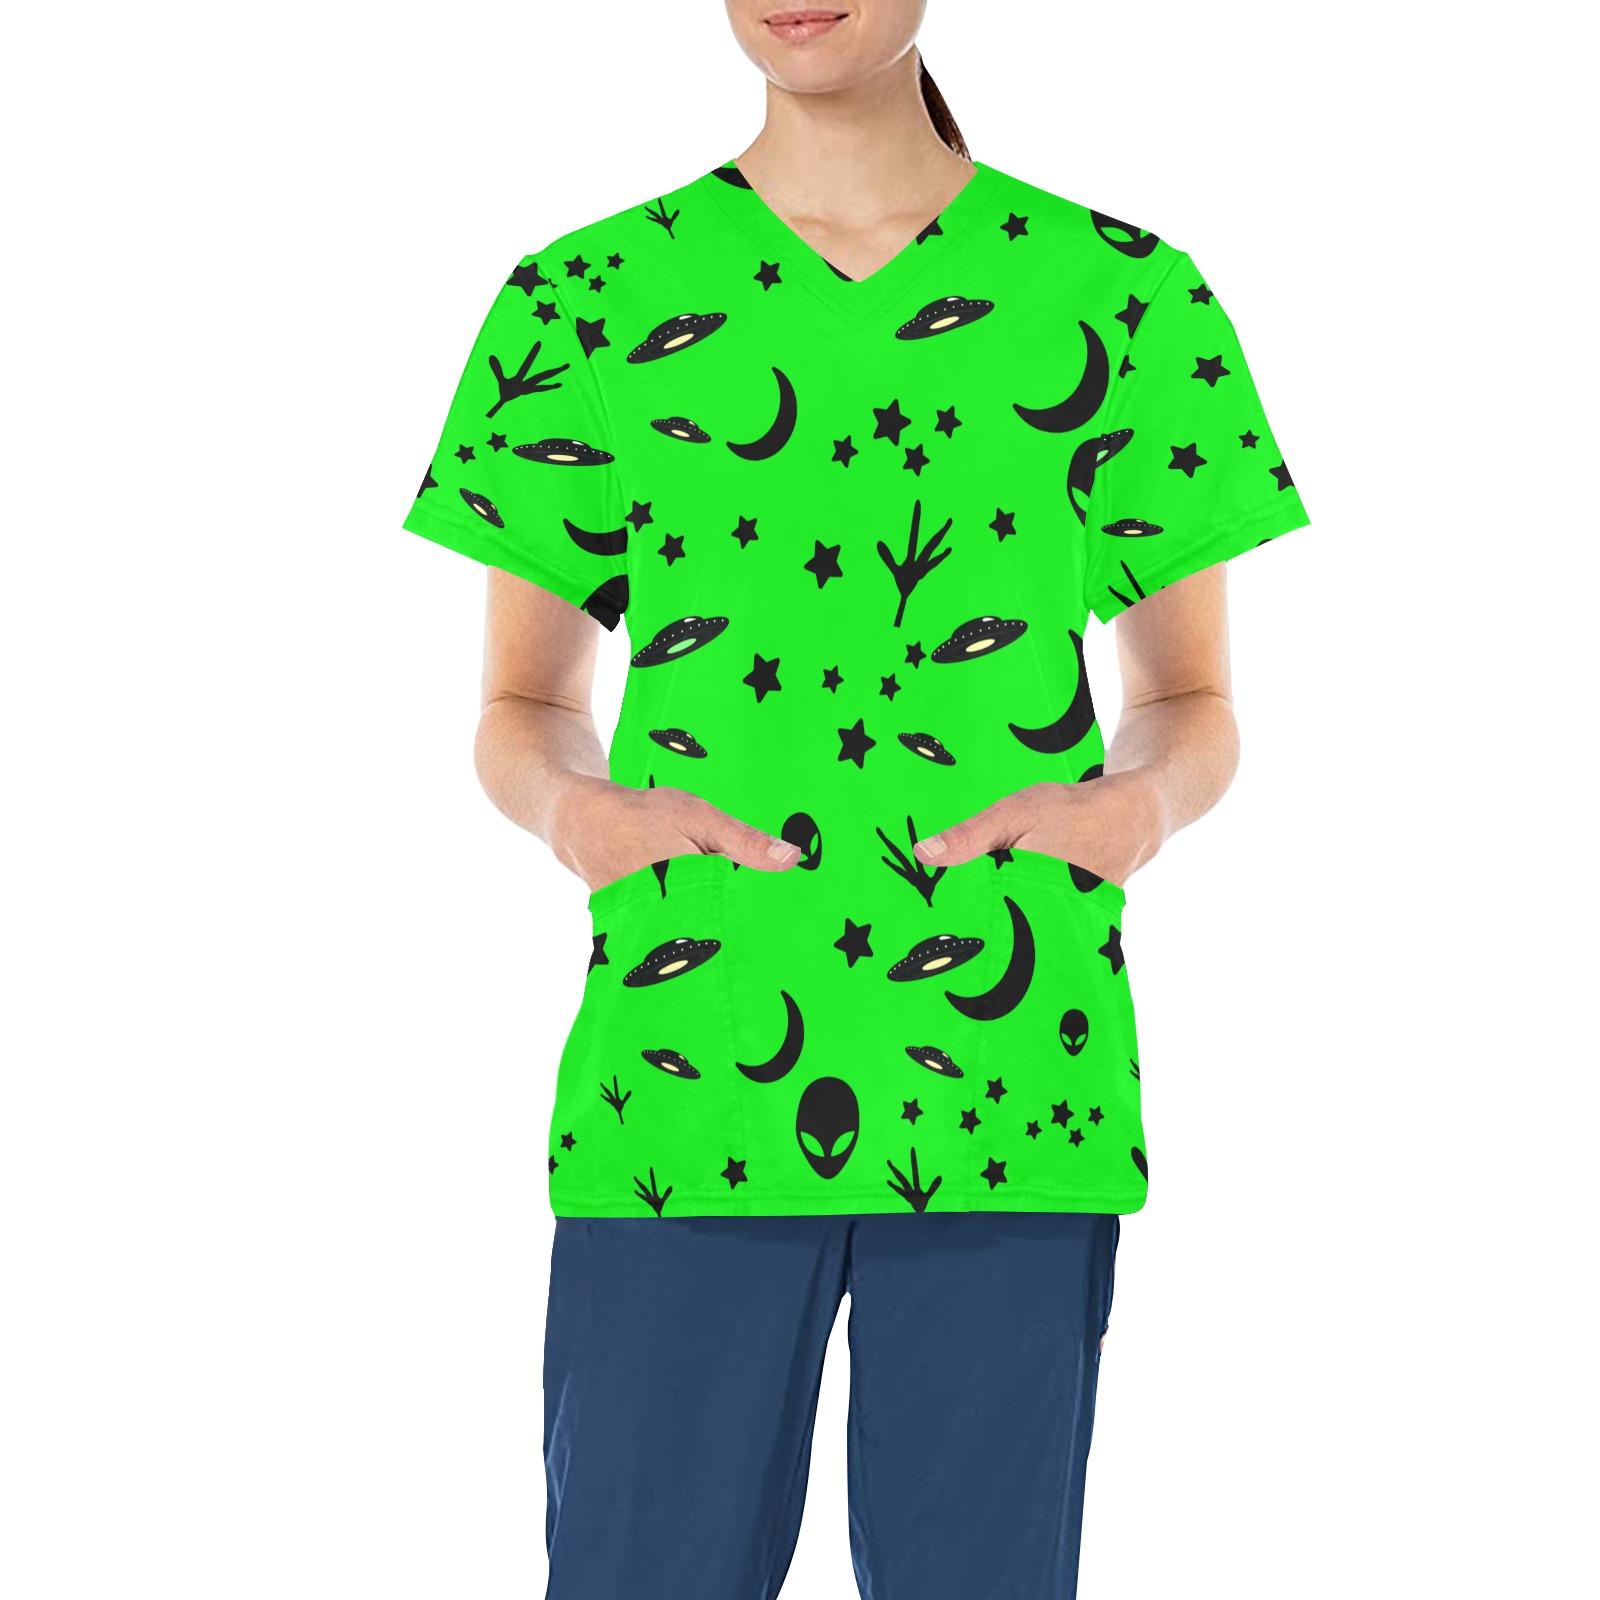 Aliens and Spaceships - Neon Green All Over Print Scrub Top